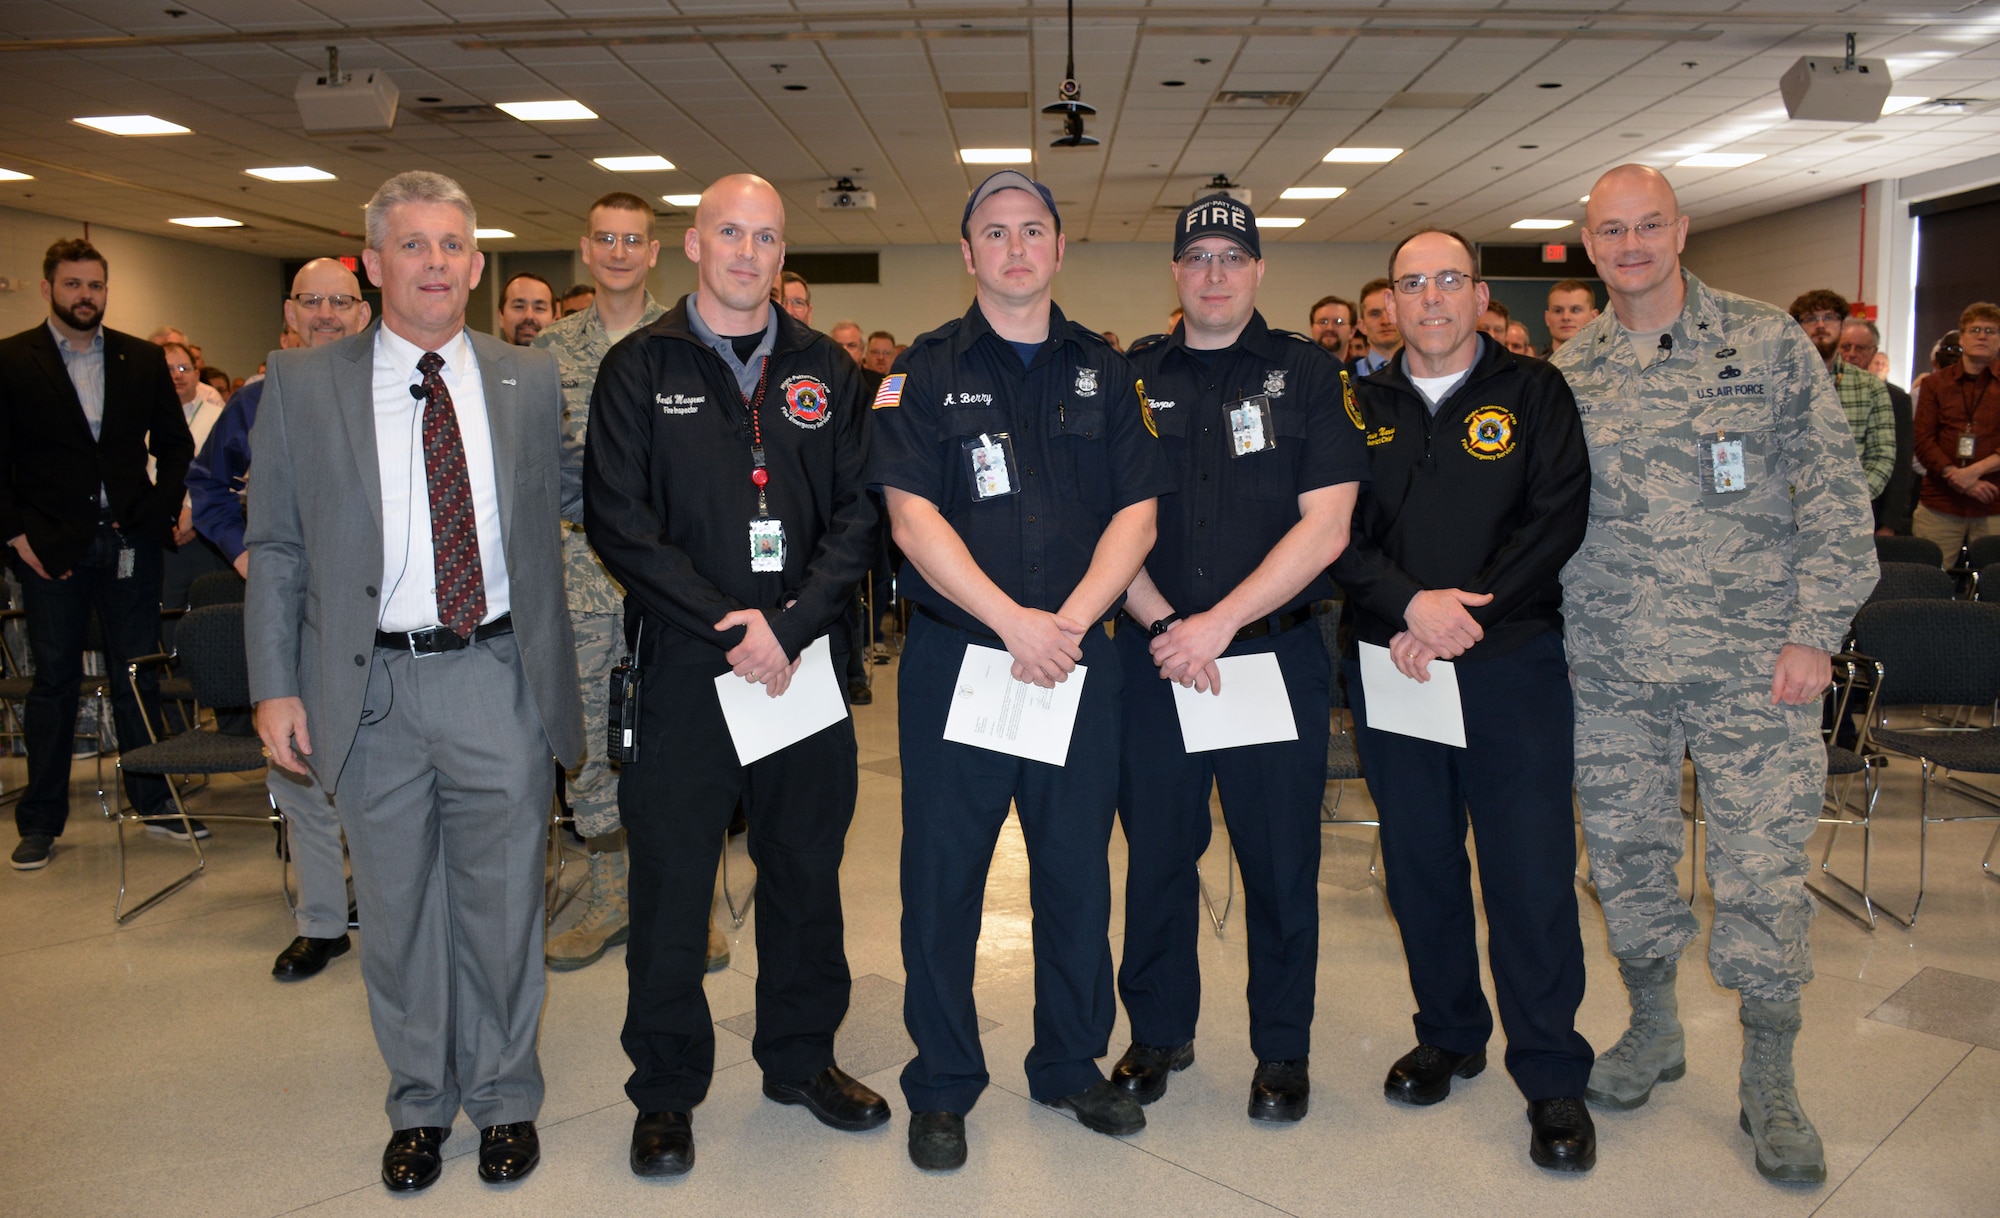 Personnel from the AFRL Materials and Manufacturing Directorate look on as Mr. Thomas Lockhart (left), Director, honors Inspector Garth Musgrove, Engine 32 representative Abram Berry, Engine 31 representative Zacherias Thorpe, and District Chief Kevin Narad of the Wright-Patterson Air Force Base Fire Department on April 12 for their quick response to a flooding event at the directorate.  Brigadier General Allan Day, Commander, Defense Logistics Agency Aviation, was also present at the event to offer his thanks.  (U.S. Air Force Photo/David Dixon)